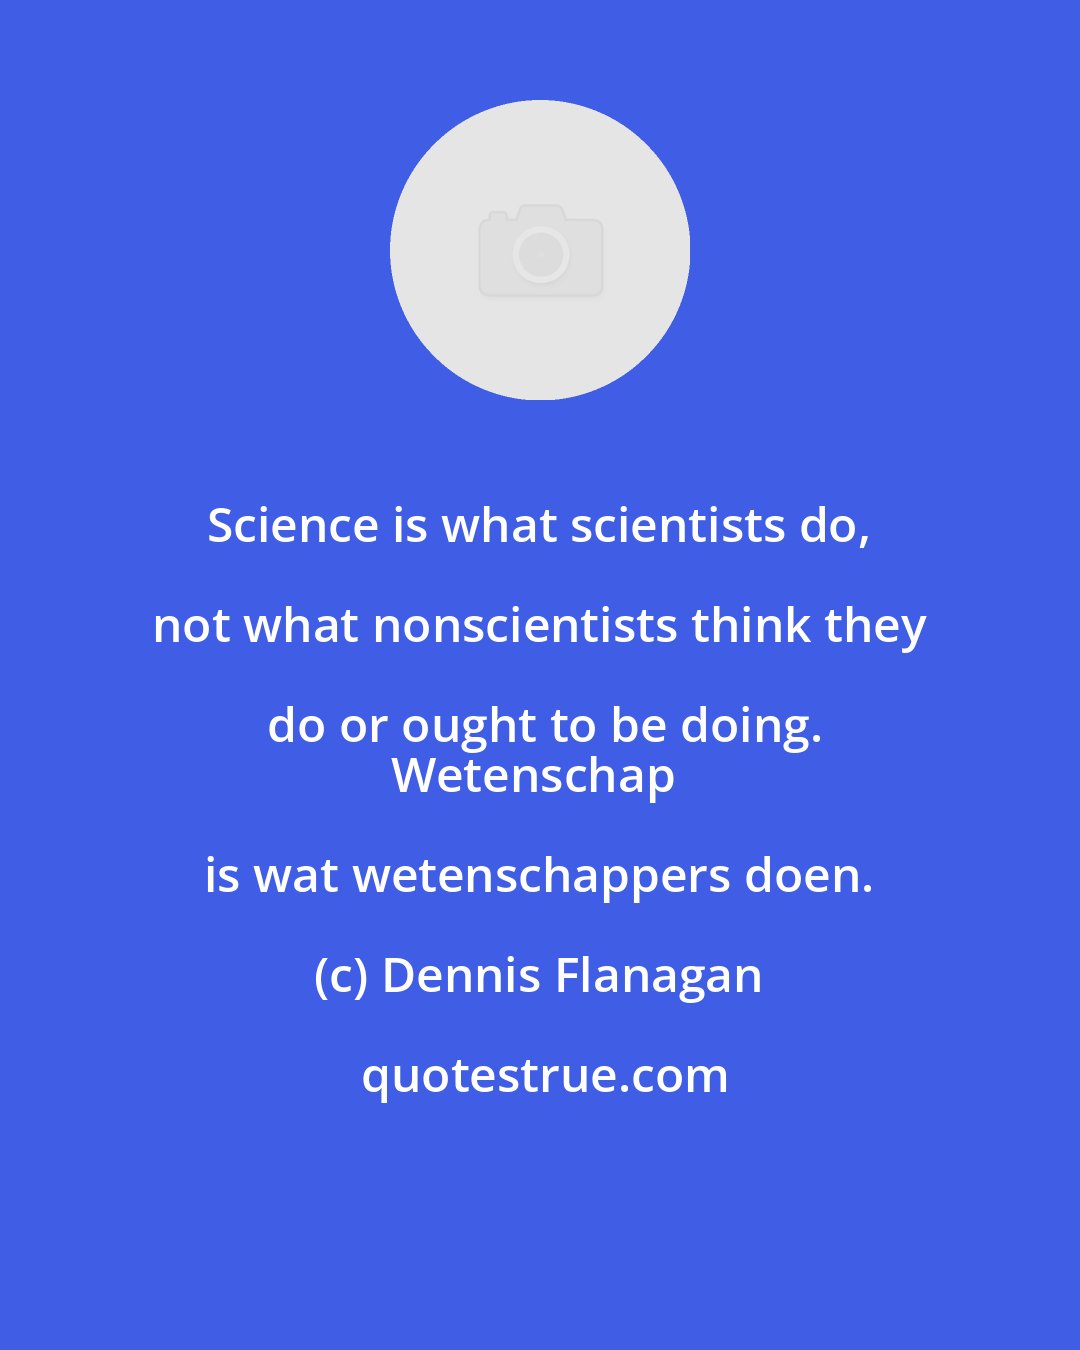 Dennis Flanagan: Science is what scientists do, not what nonscientists think they do or ought to be doing.
Wetenschap is wat wetenschappers doen.